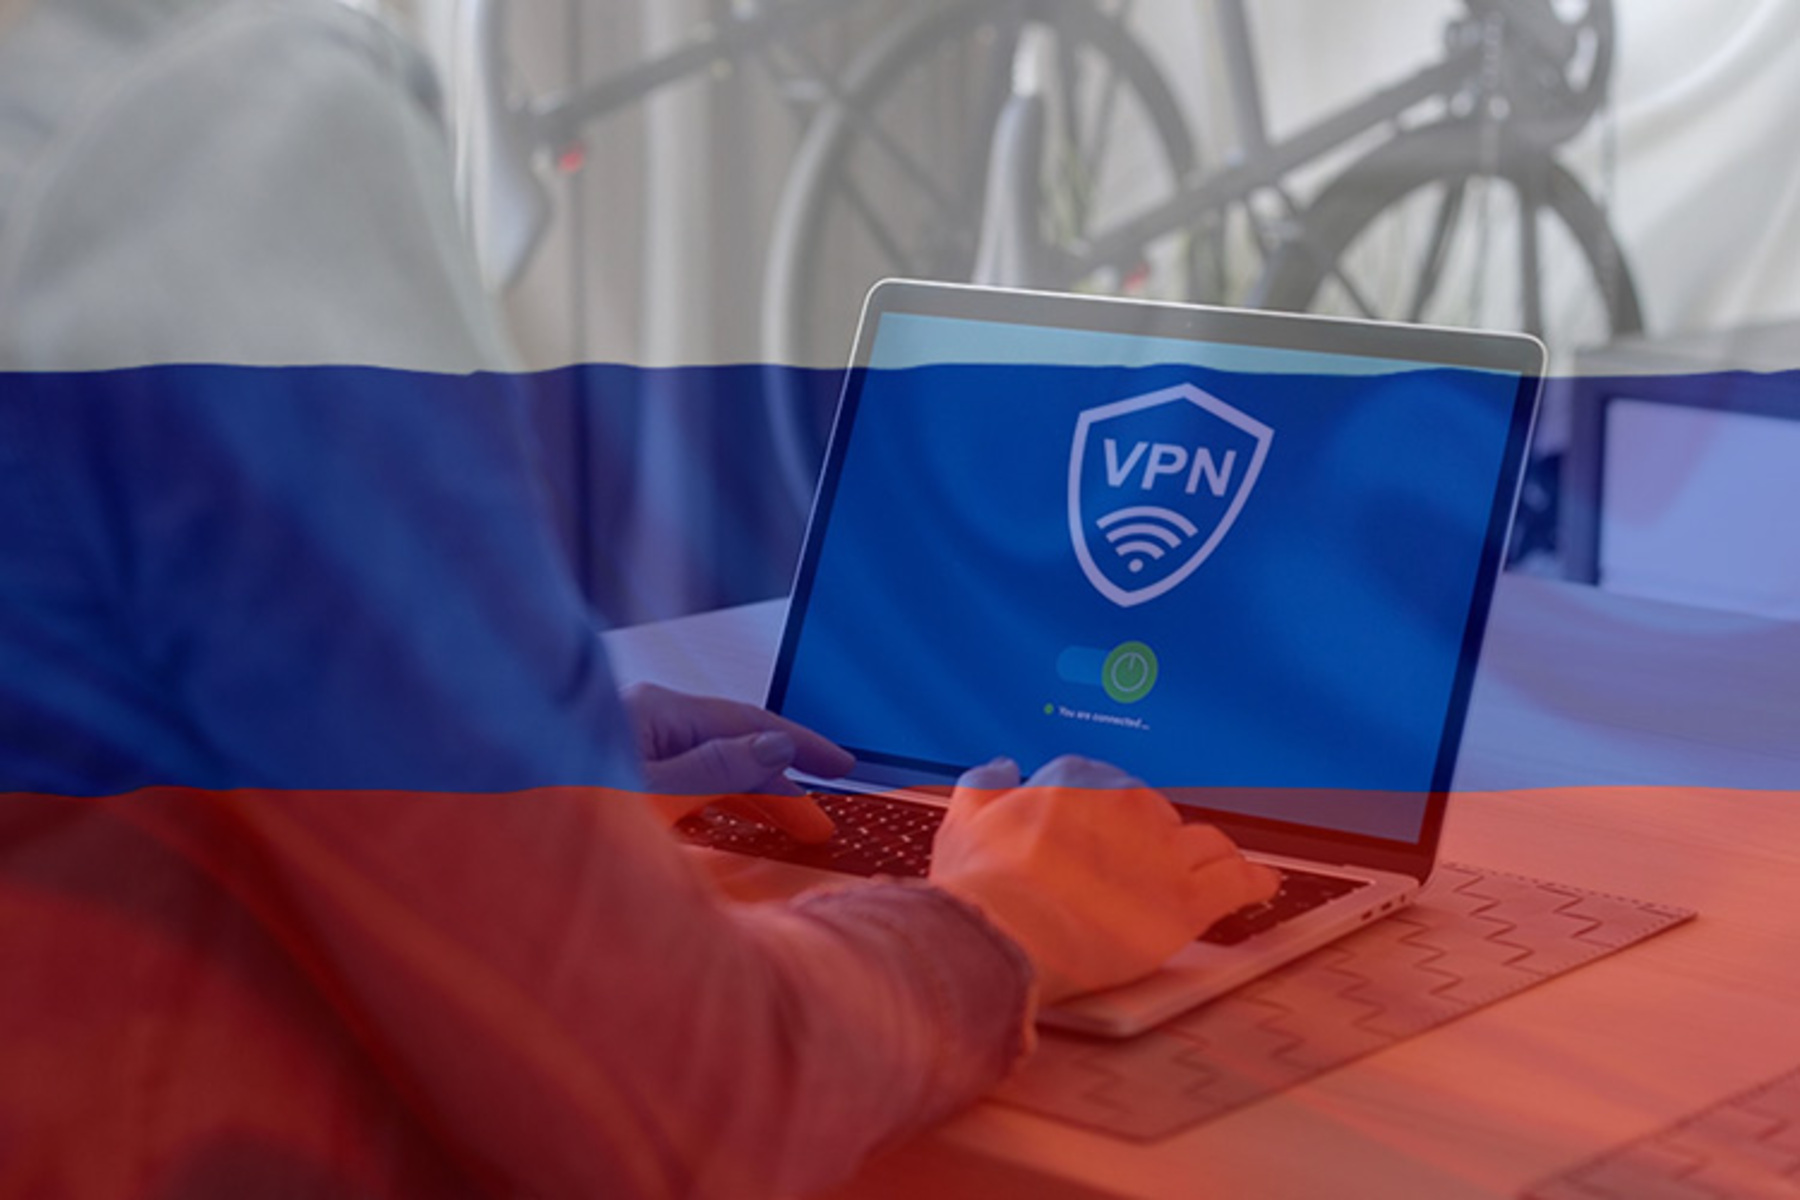 VPN demand increased by 2000 in Russia